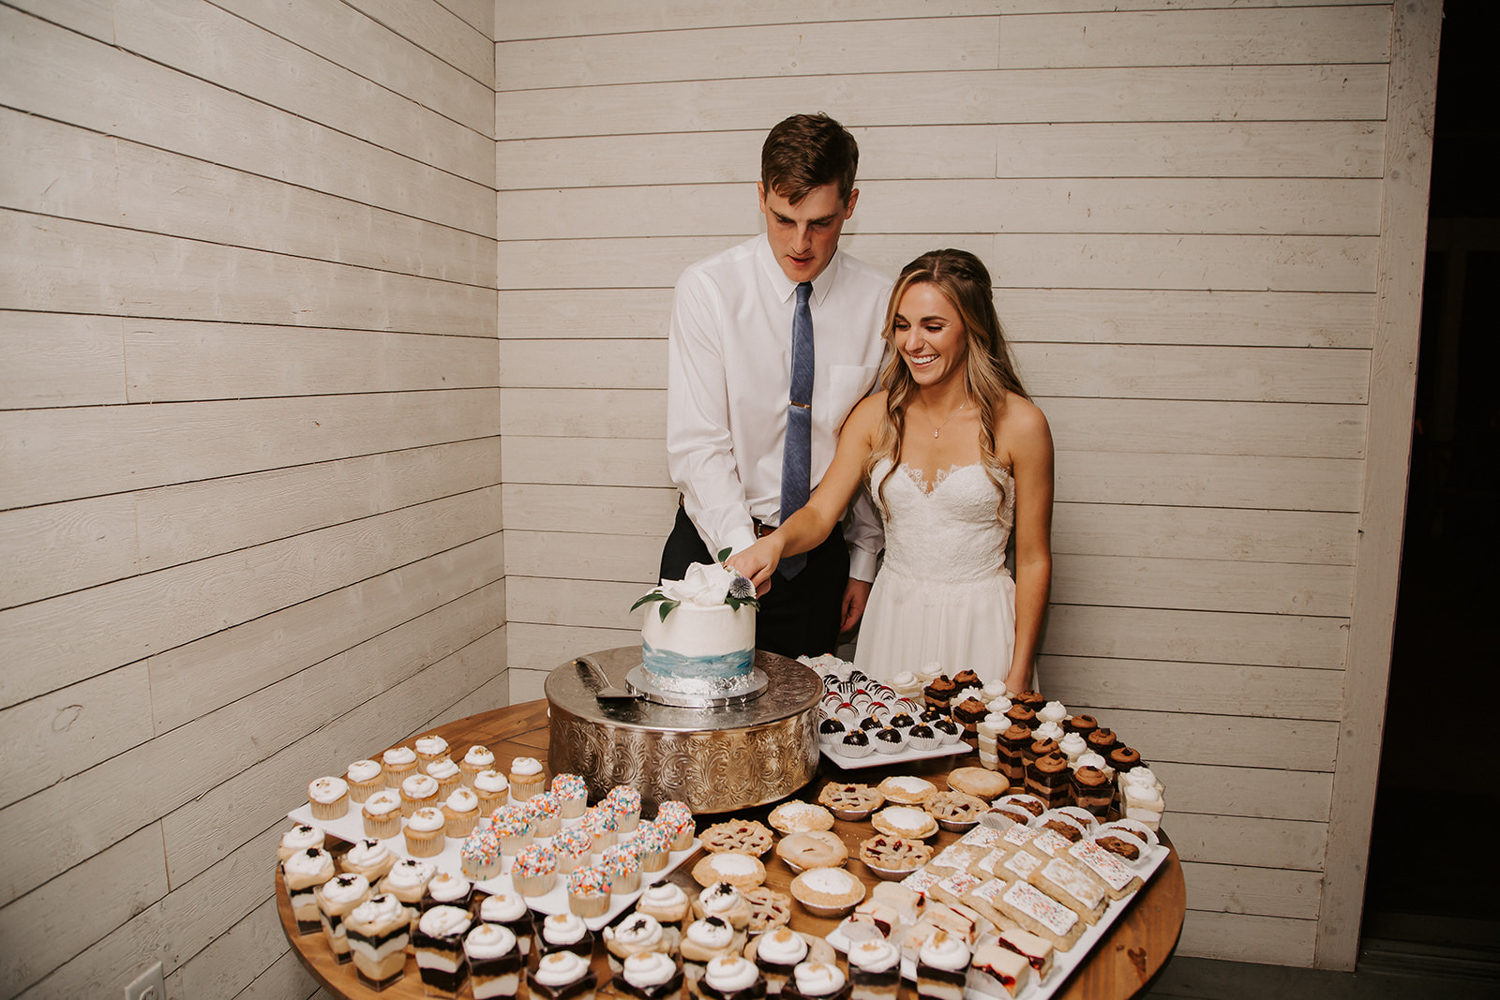 bride and groom cutting small cake on table with other desserts